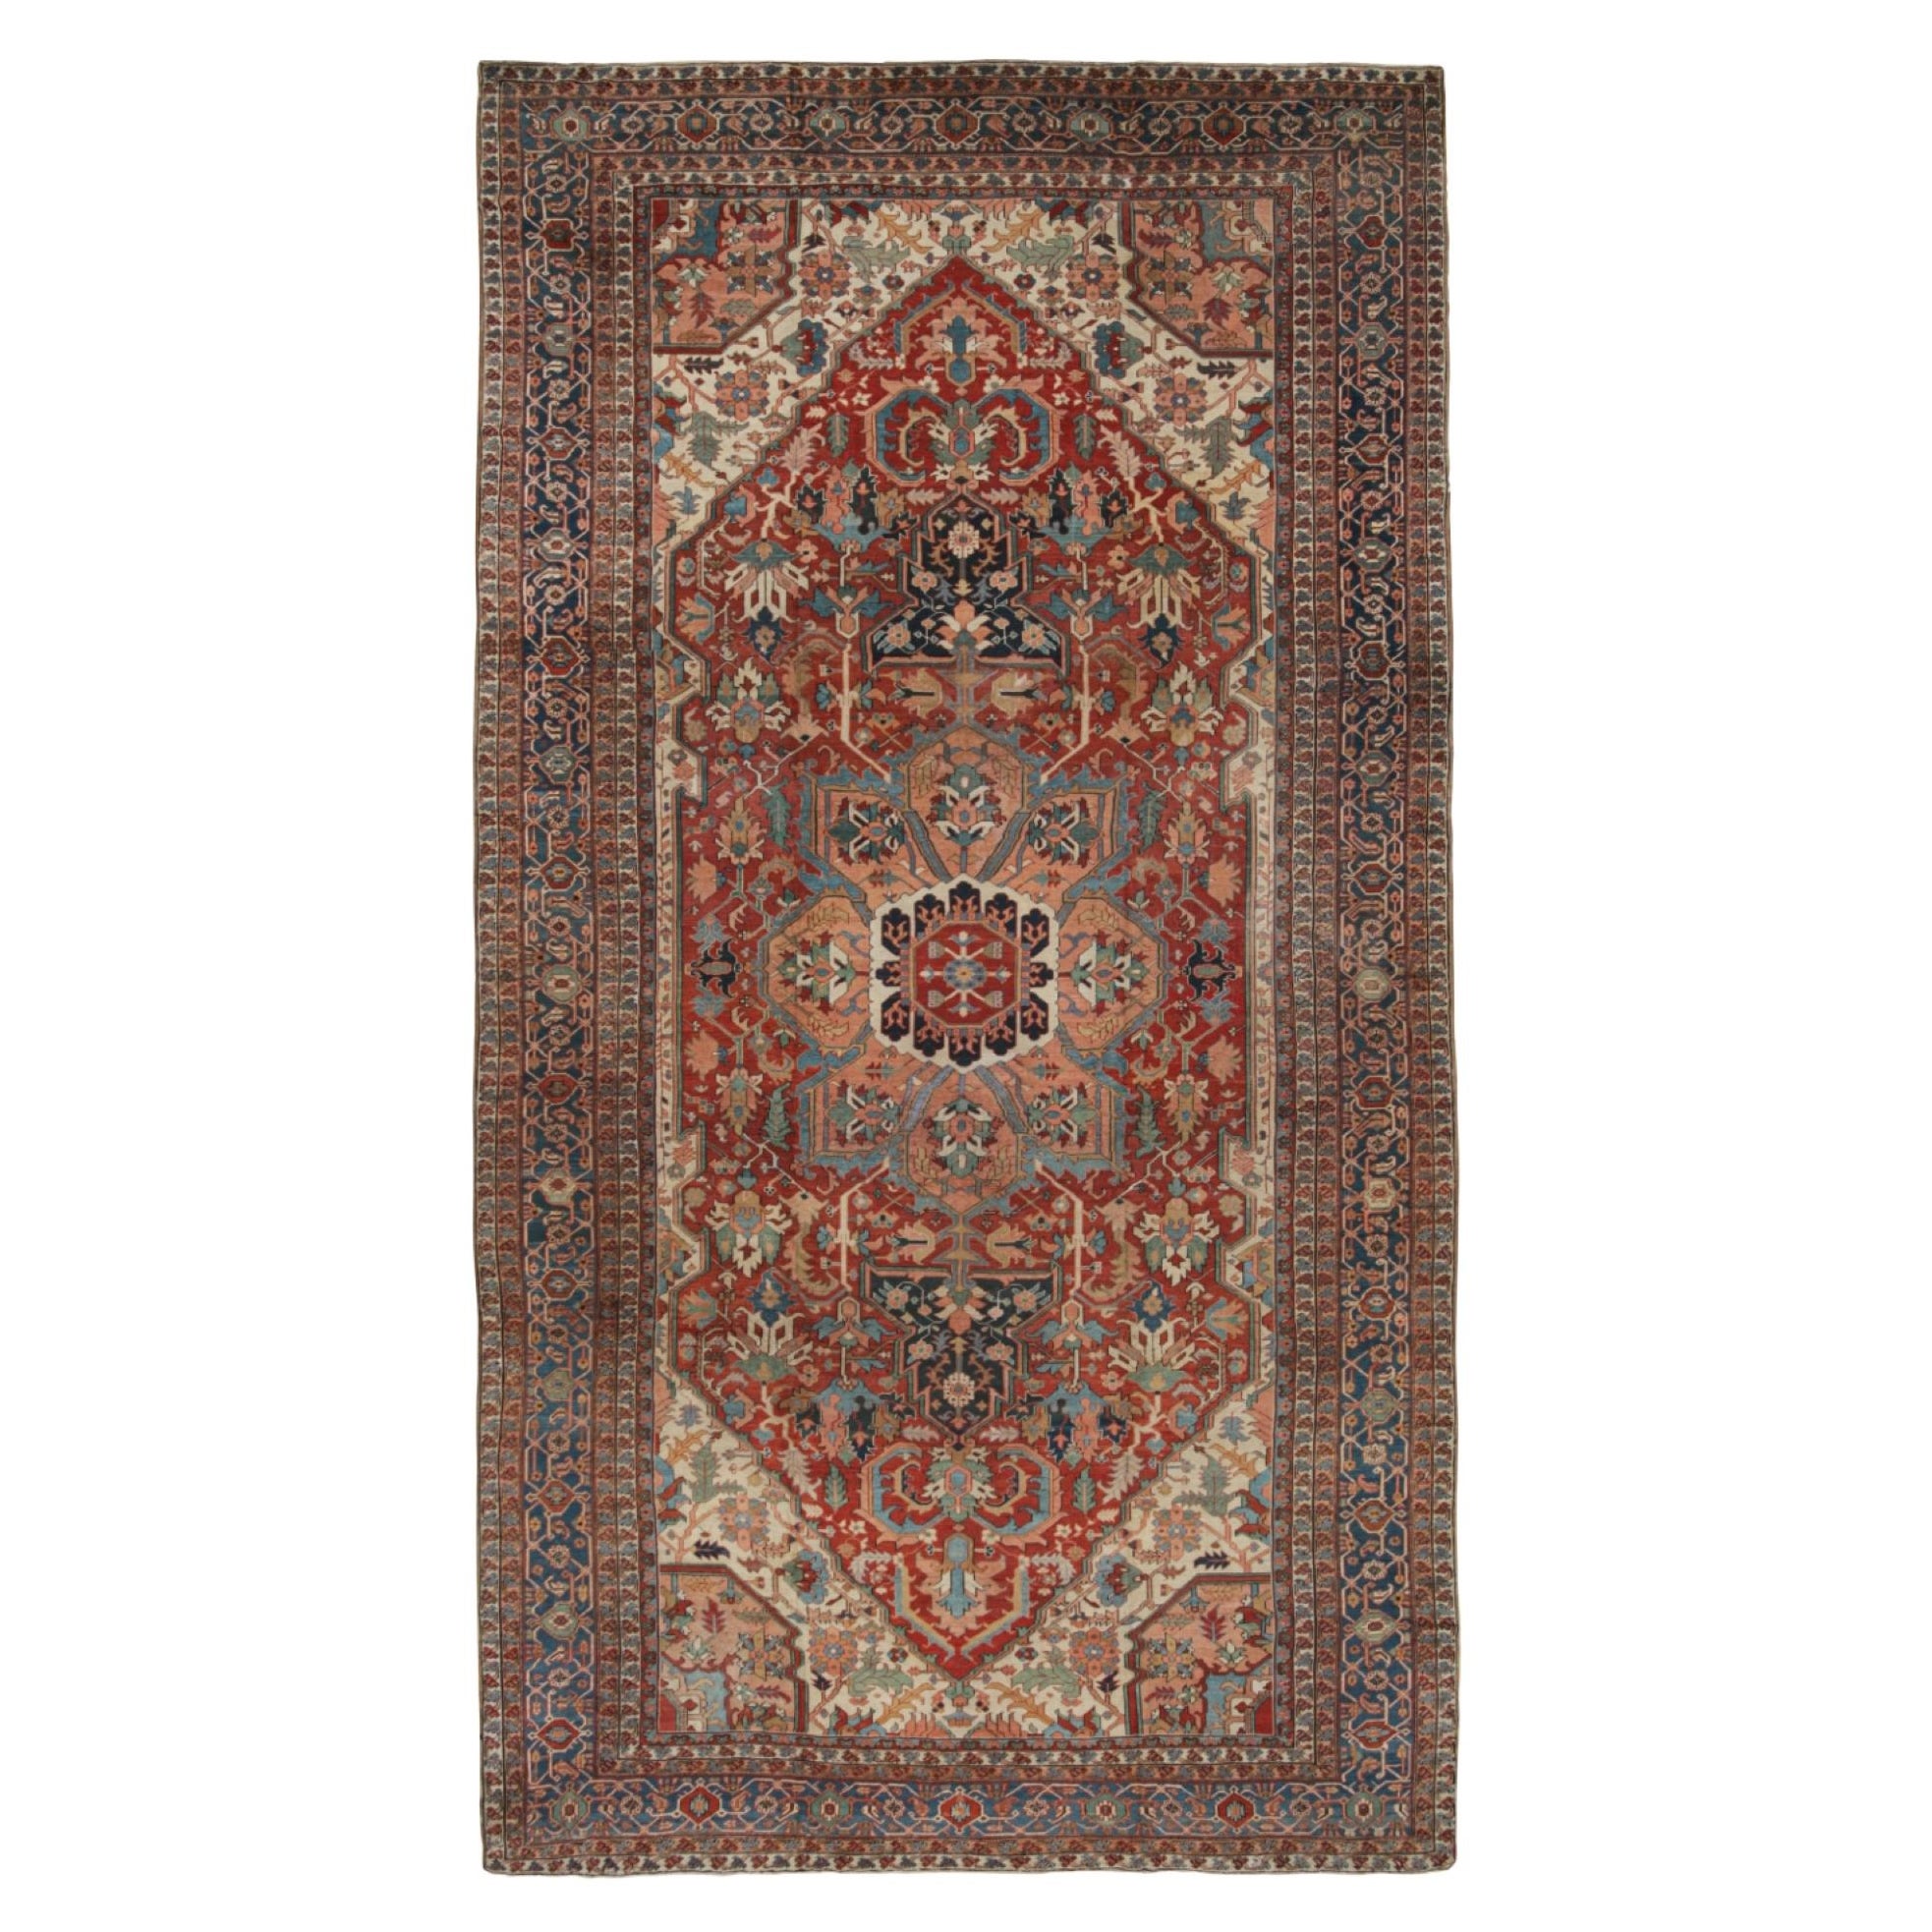 Antique Oversized Heriz Persian Rug in Red with Medallion